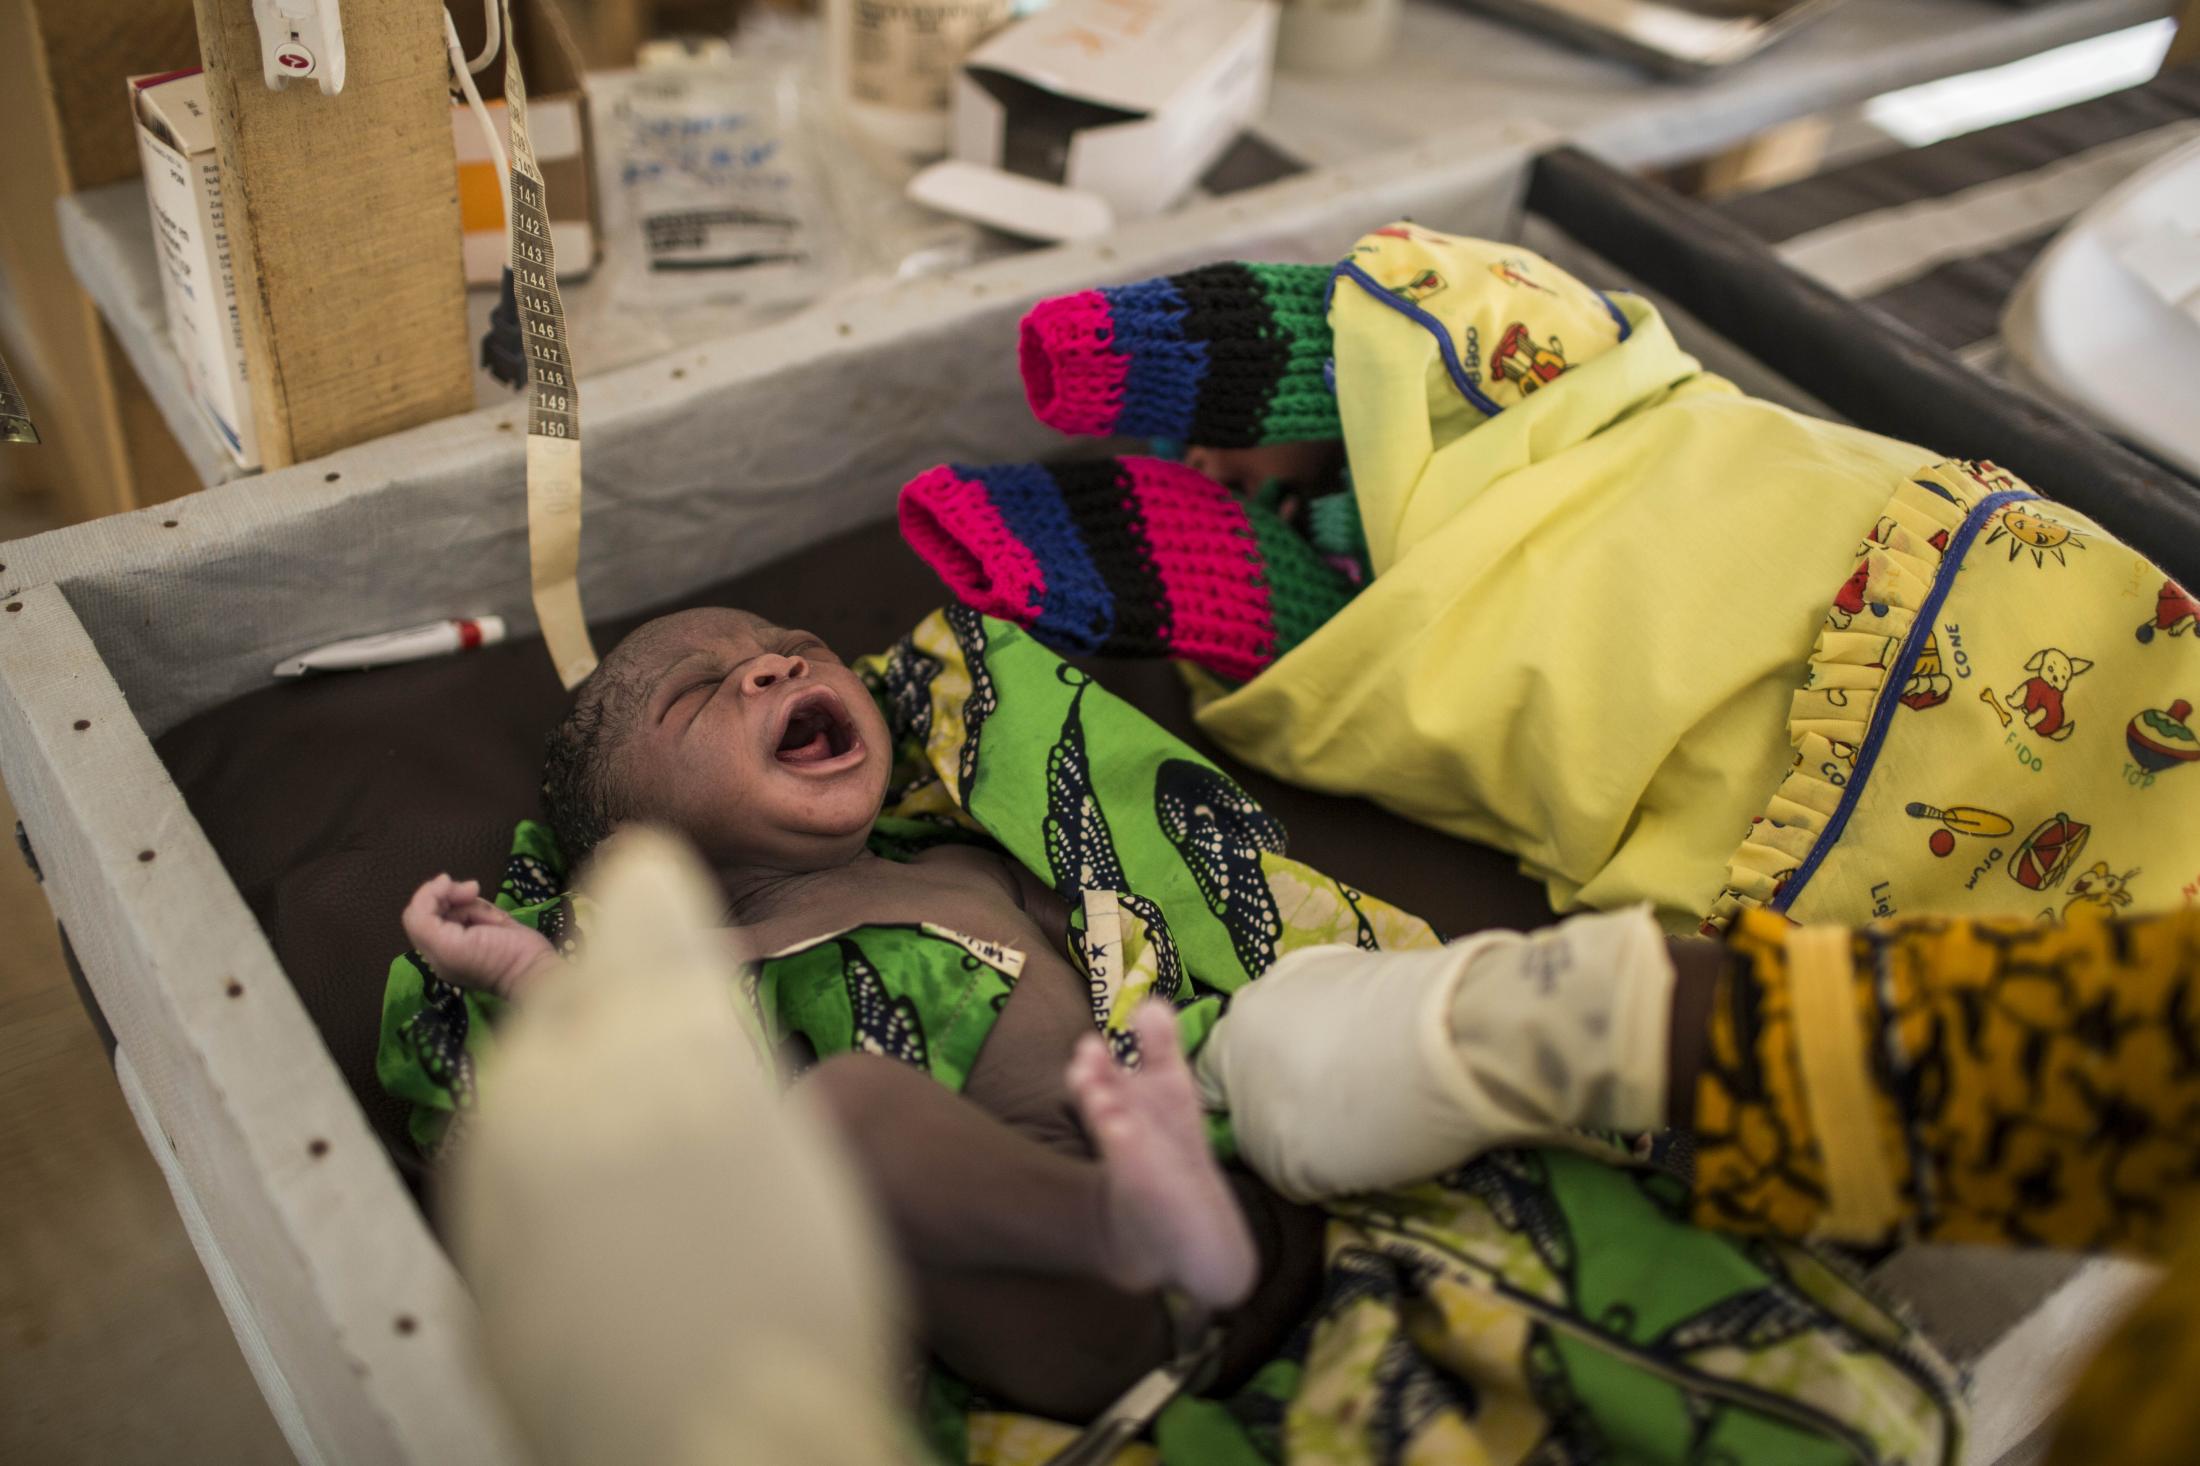 Giving birth in a Refugee camp